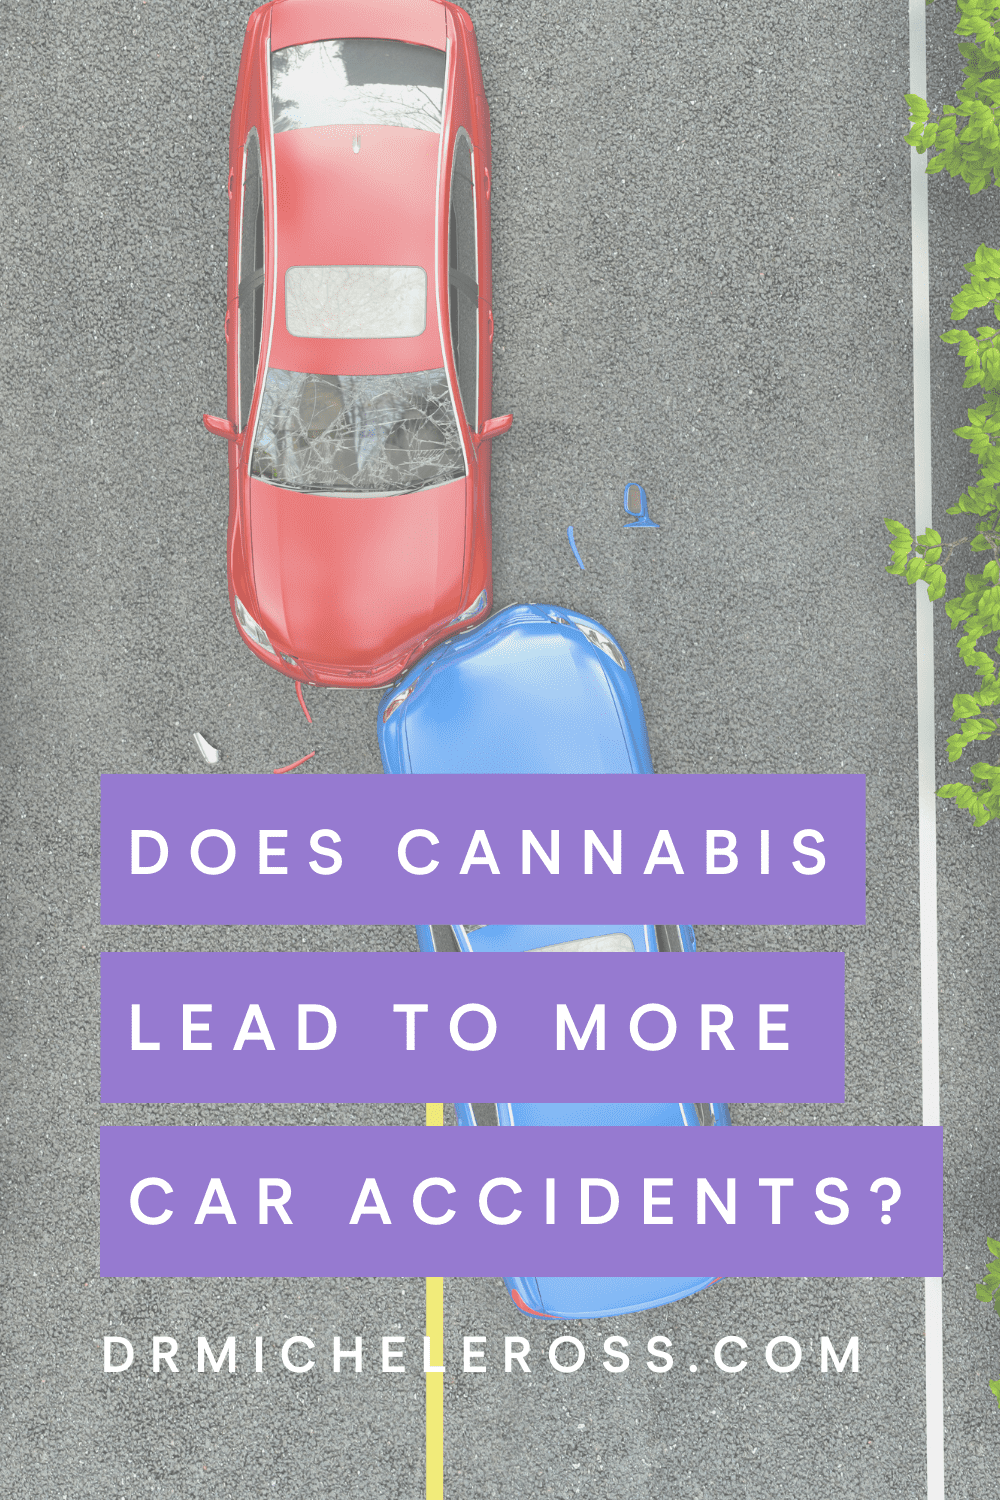 Is It Really True That Marijuana Use Leads To Increased Auto Accidents?